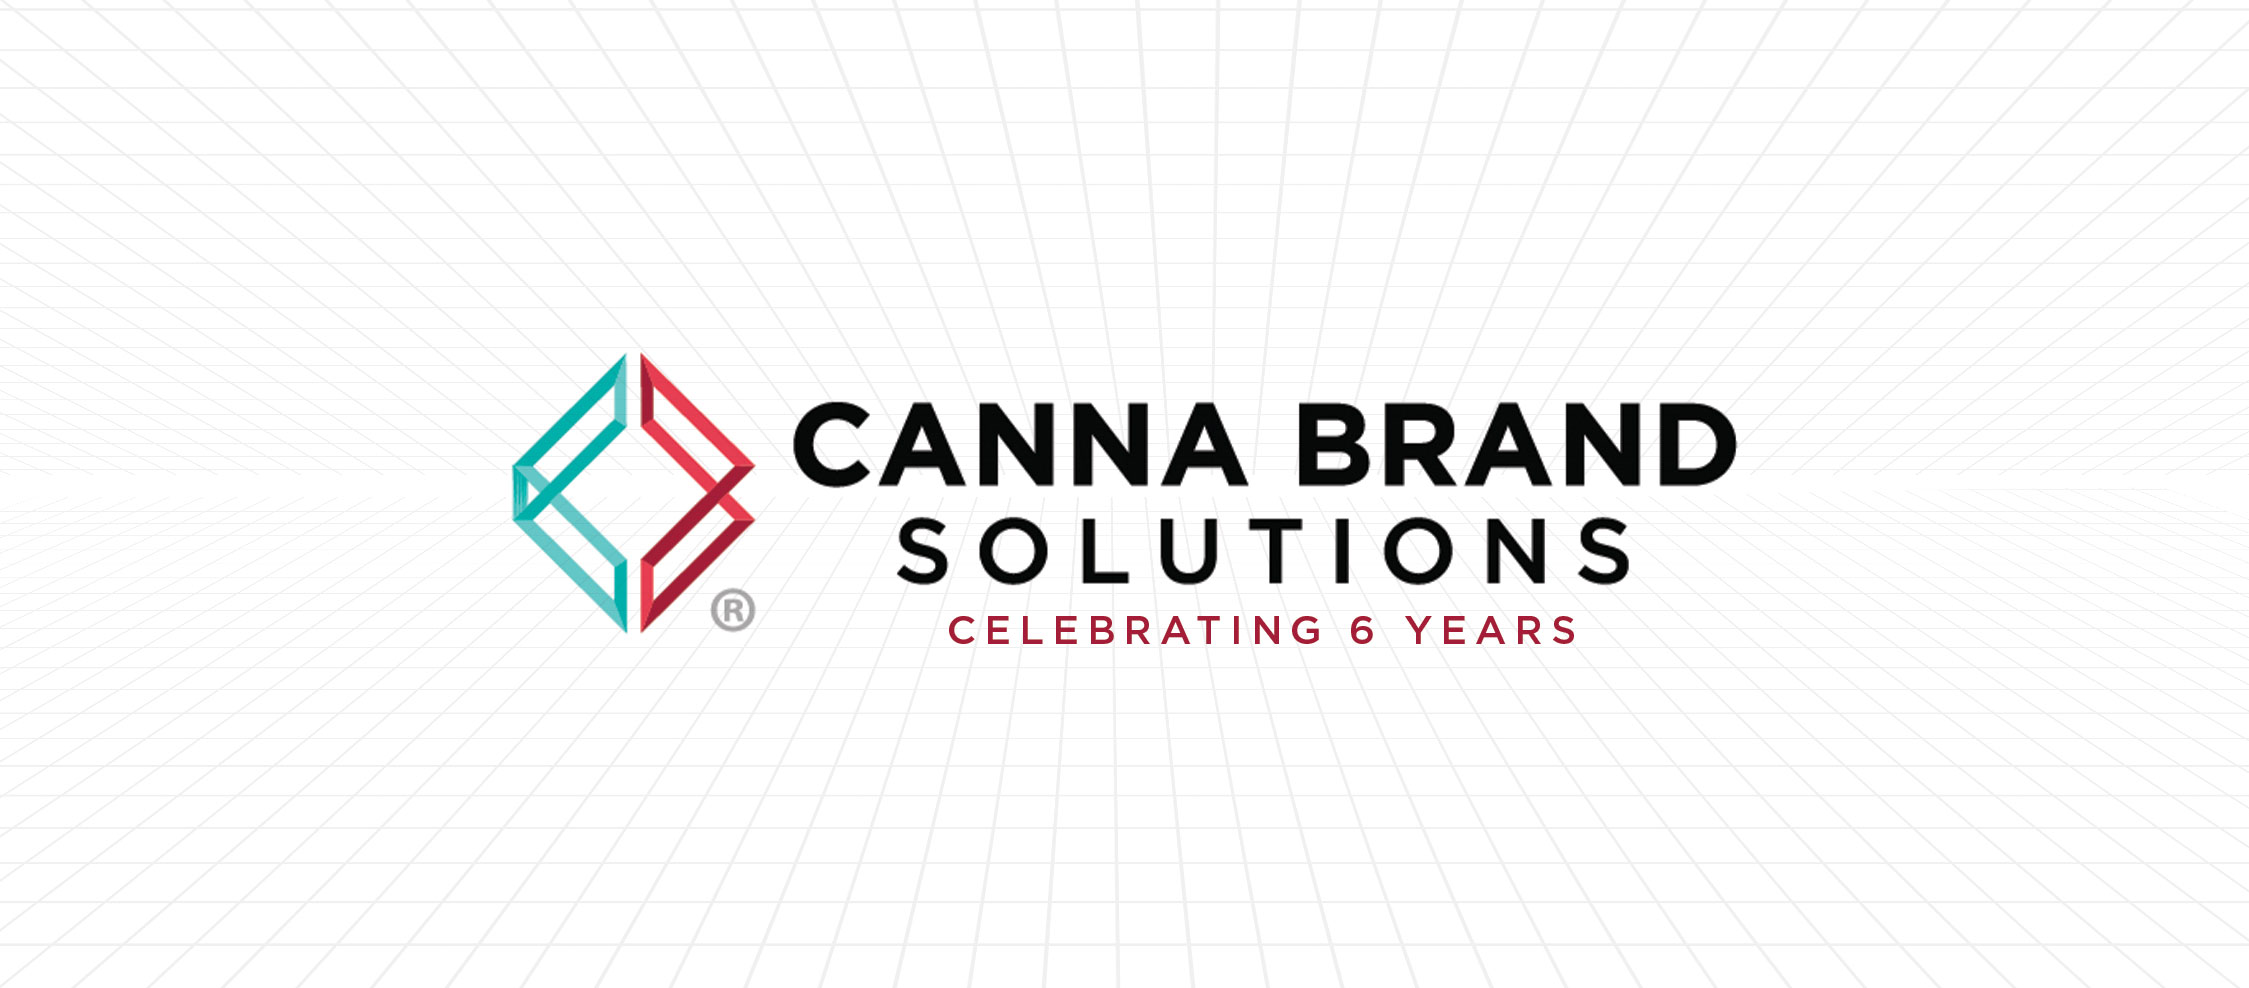 canna-brand-solutions-core-values